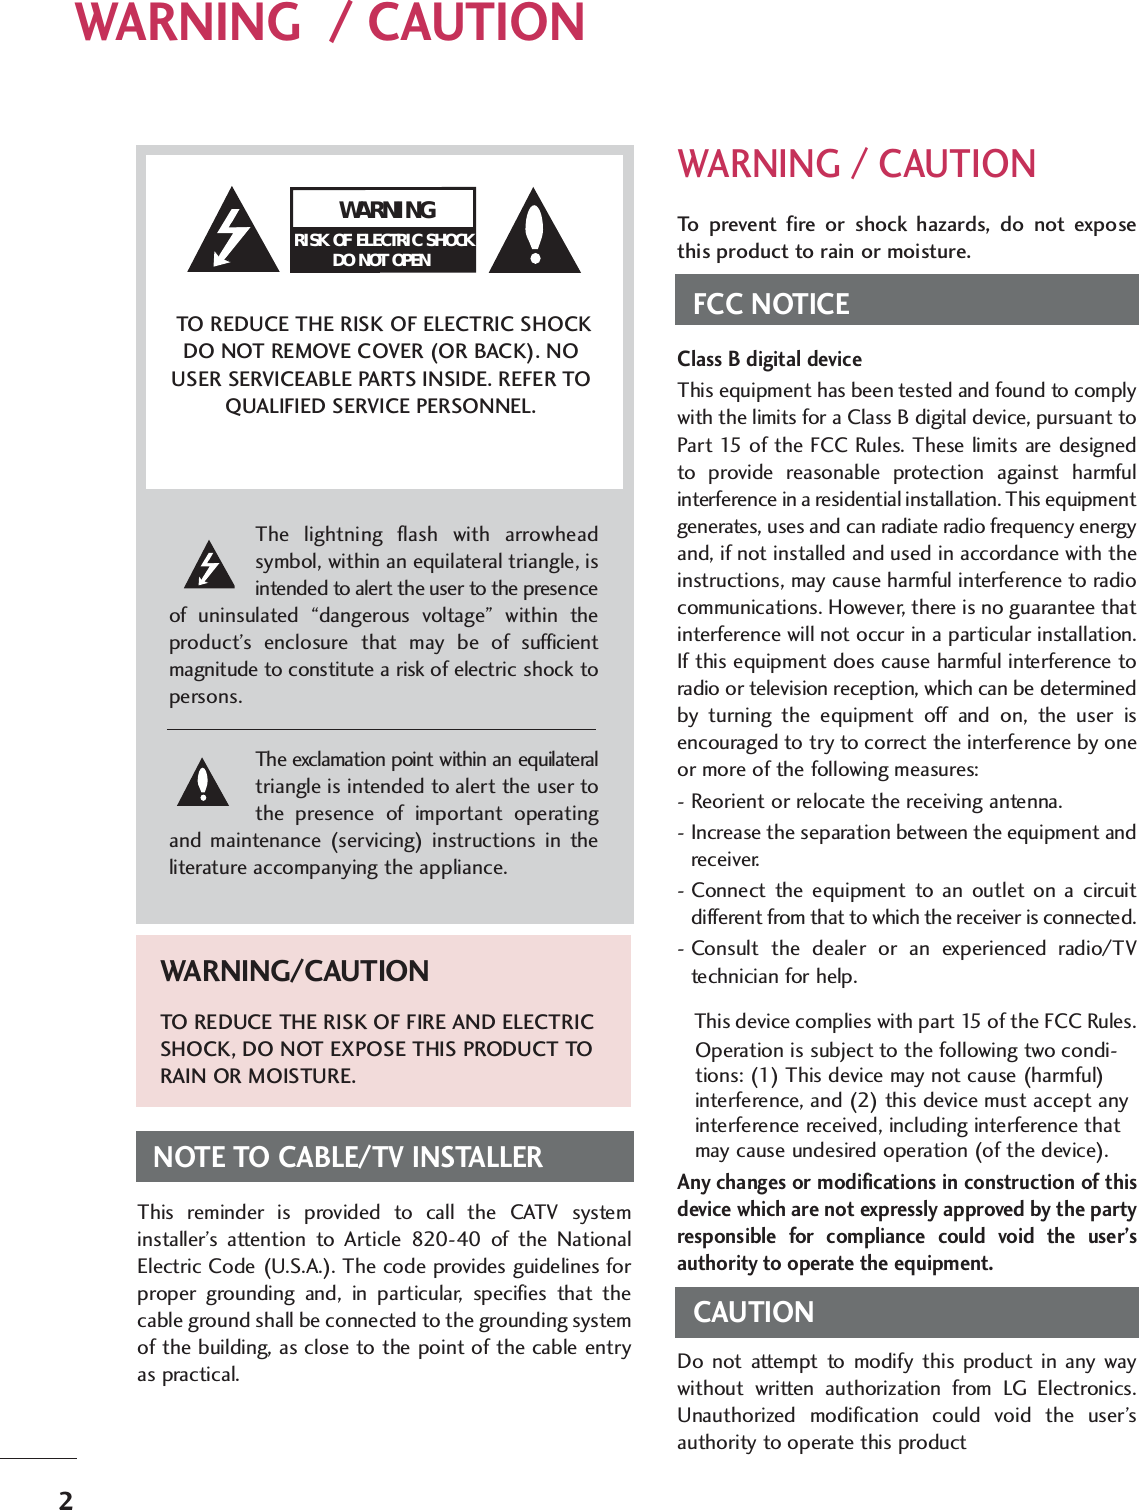 2WARNING  / CAUTIONWARNING / CAUTIONTo prevent fire or shock hazards, do not exposethis product to rain or moisture.FCC NOTICEClass B digital deviceThis equipment has been tested and found to complywith the limits for a Class B digital device, pursuant toPart 15 of the FCC Rules. These limits are designedto provide reasonable protection against harmfulinterference in a residential installation. This equipmentgenerates, uses and can radiate radio frequency energyand, if not installed and used in accordance with theinstructions, may cause harmful interference to radiocommunications. However, there is no guarantee thatinterference will not occur in a particular installation.If this equipment does cause harmful interference toradio or television reception, which can be determinedby turning the equipment off and on, the user isencouraged to try to correct the interference by oneor more of the following measures:- Reorient or relocate the receiving antenna.- Increase the separation between the equipment andreceiver.- Connect the equipment to an outlet on a circuitdifferent from that to which the receiver is connected.- Consult the dealer or an experienced radio/TVtechnician for help.This device complies with part 15 of the FCC Rules.Operation is subject to the following two condi-tions: (1) This device may not cause (harmful)interference, and (2) this device must accept anyinterference received, including interference thatmay cause undesired operation (of the device).Any changes or modifications in construction of thisdevice which are not expressly approved by the partyresponsible for compliance could void the user’sauthority to operate the equipment.CAUTIONDo not attempt to modify this product in any waywithout written authorization from LG Electronics.Unauthorized modification could void the user’sauthority to operate this product WARNINGRISK OF ELECTRIC SHOCK DO NOT OPENThe lightning flash with arrowheadsymbol, within an equilateral triangle, isintended to alert the user to the presenceof uninsulated “dangerous voltage” within theproduct’s enclosure that may be of sufficientmagnitude to constitute a risk of electric shock topersons.The exclamation point within an equilateraltriangle is intended to alert the user tothe presence of important operatingand maintenance (servicing) instructions in theliterature accompanying the appliance.TO REDUCE THE RISK OF ELECTRIC SHOCKDO NOT REMOVE COVER (OR BACK). NOUSER SERVICEABLE PARTS INSIDE. REFER TOQUALIFIED SERVICE PERSONNEL.WARNING/CAUTIONTO REDUCE THE RISK OF FIRE AND ELECTRICSHOCK, DO NOT EXPOSE THIS PRODUCT TORAIN OR MOISTURE.NOTE TO CABLE/TV INSTALLERThis reminder is provided to call the CATV systeminstaller’s attention to Article 820-40 of the NationalElectric Code (U.S.A.). The code provides guidelines forproper grounding and, in particular, specifies that thecable ground shall be connected to the grounding systemof the building, as close to the point of the cable entryas practical.K